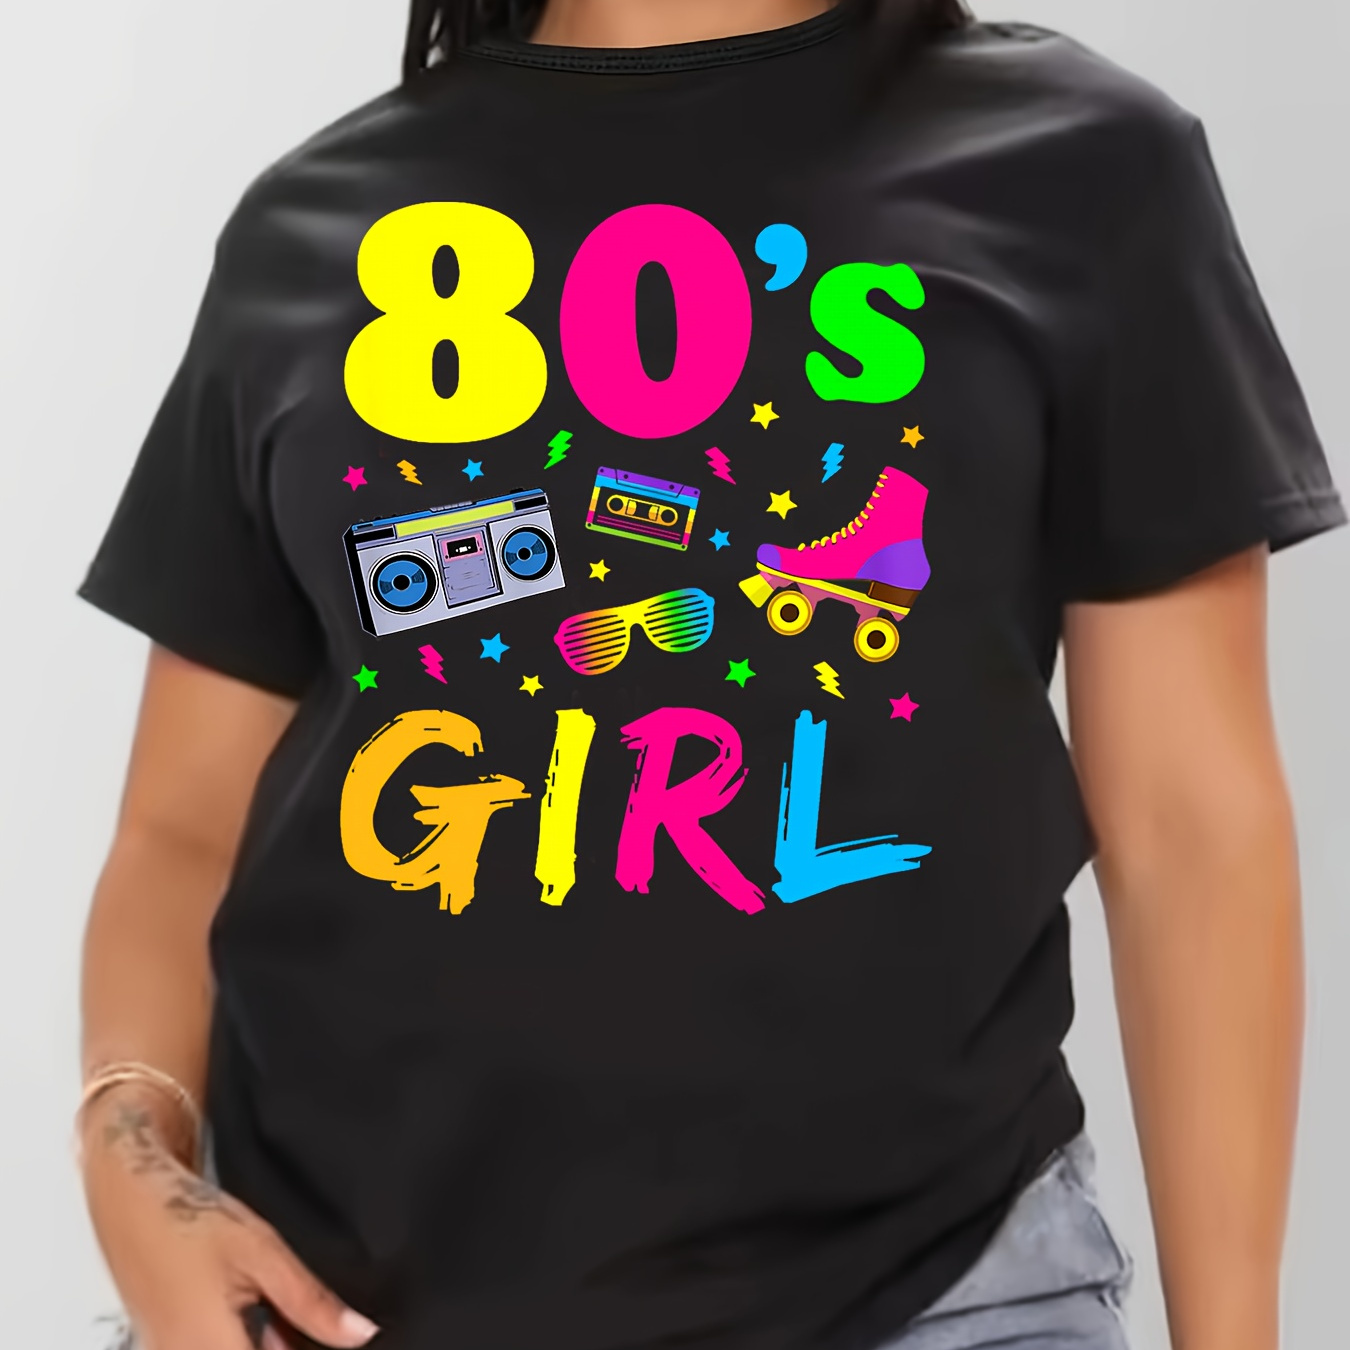 

Women's Retro 80's Print Casual Tee, T-shirt With Colorful Music & Roller Skate Print, Comfortable Short Sleeve Top For Music Festival & Everyday Wear